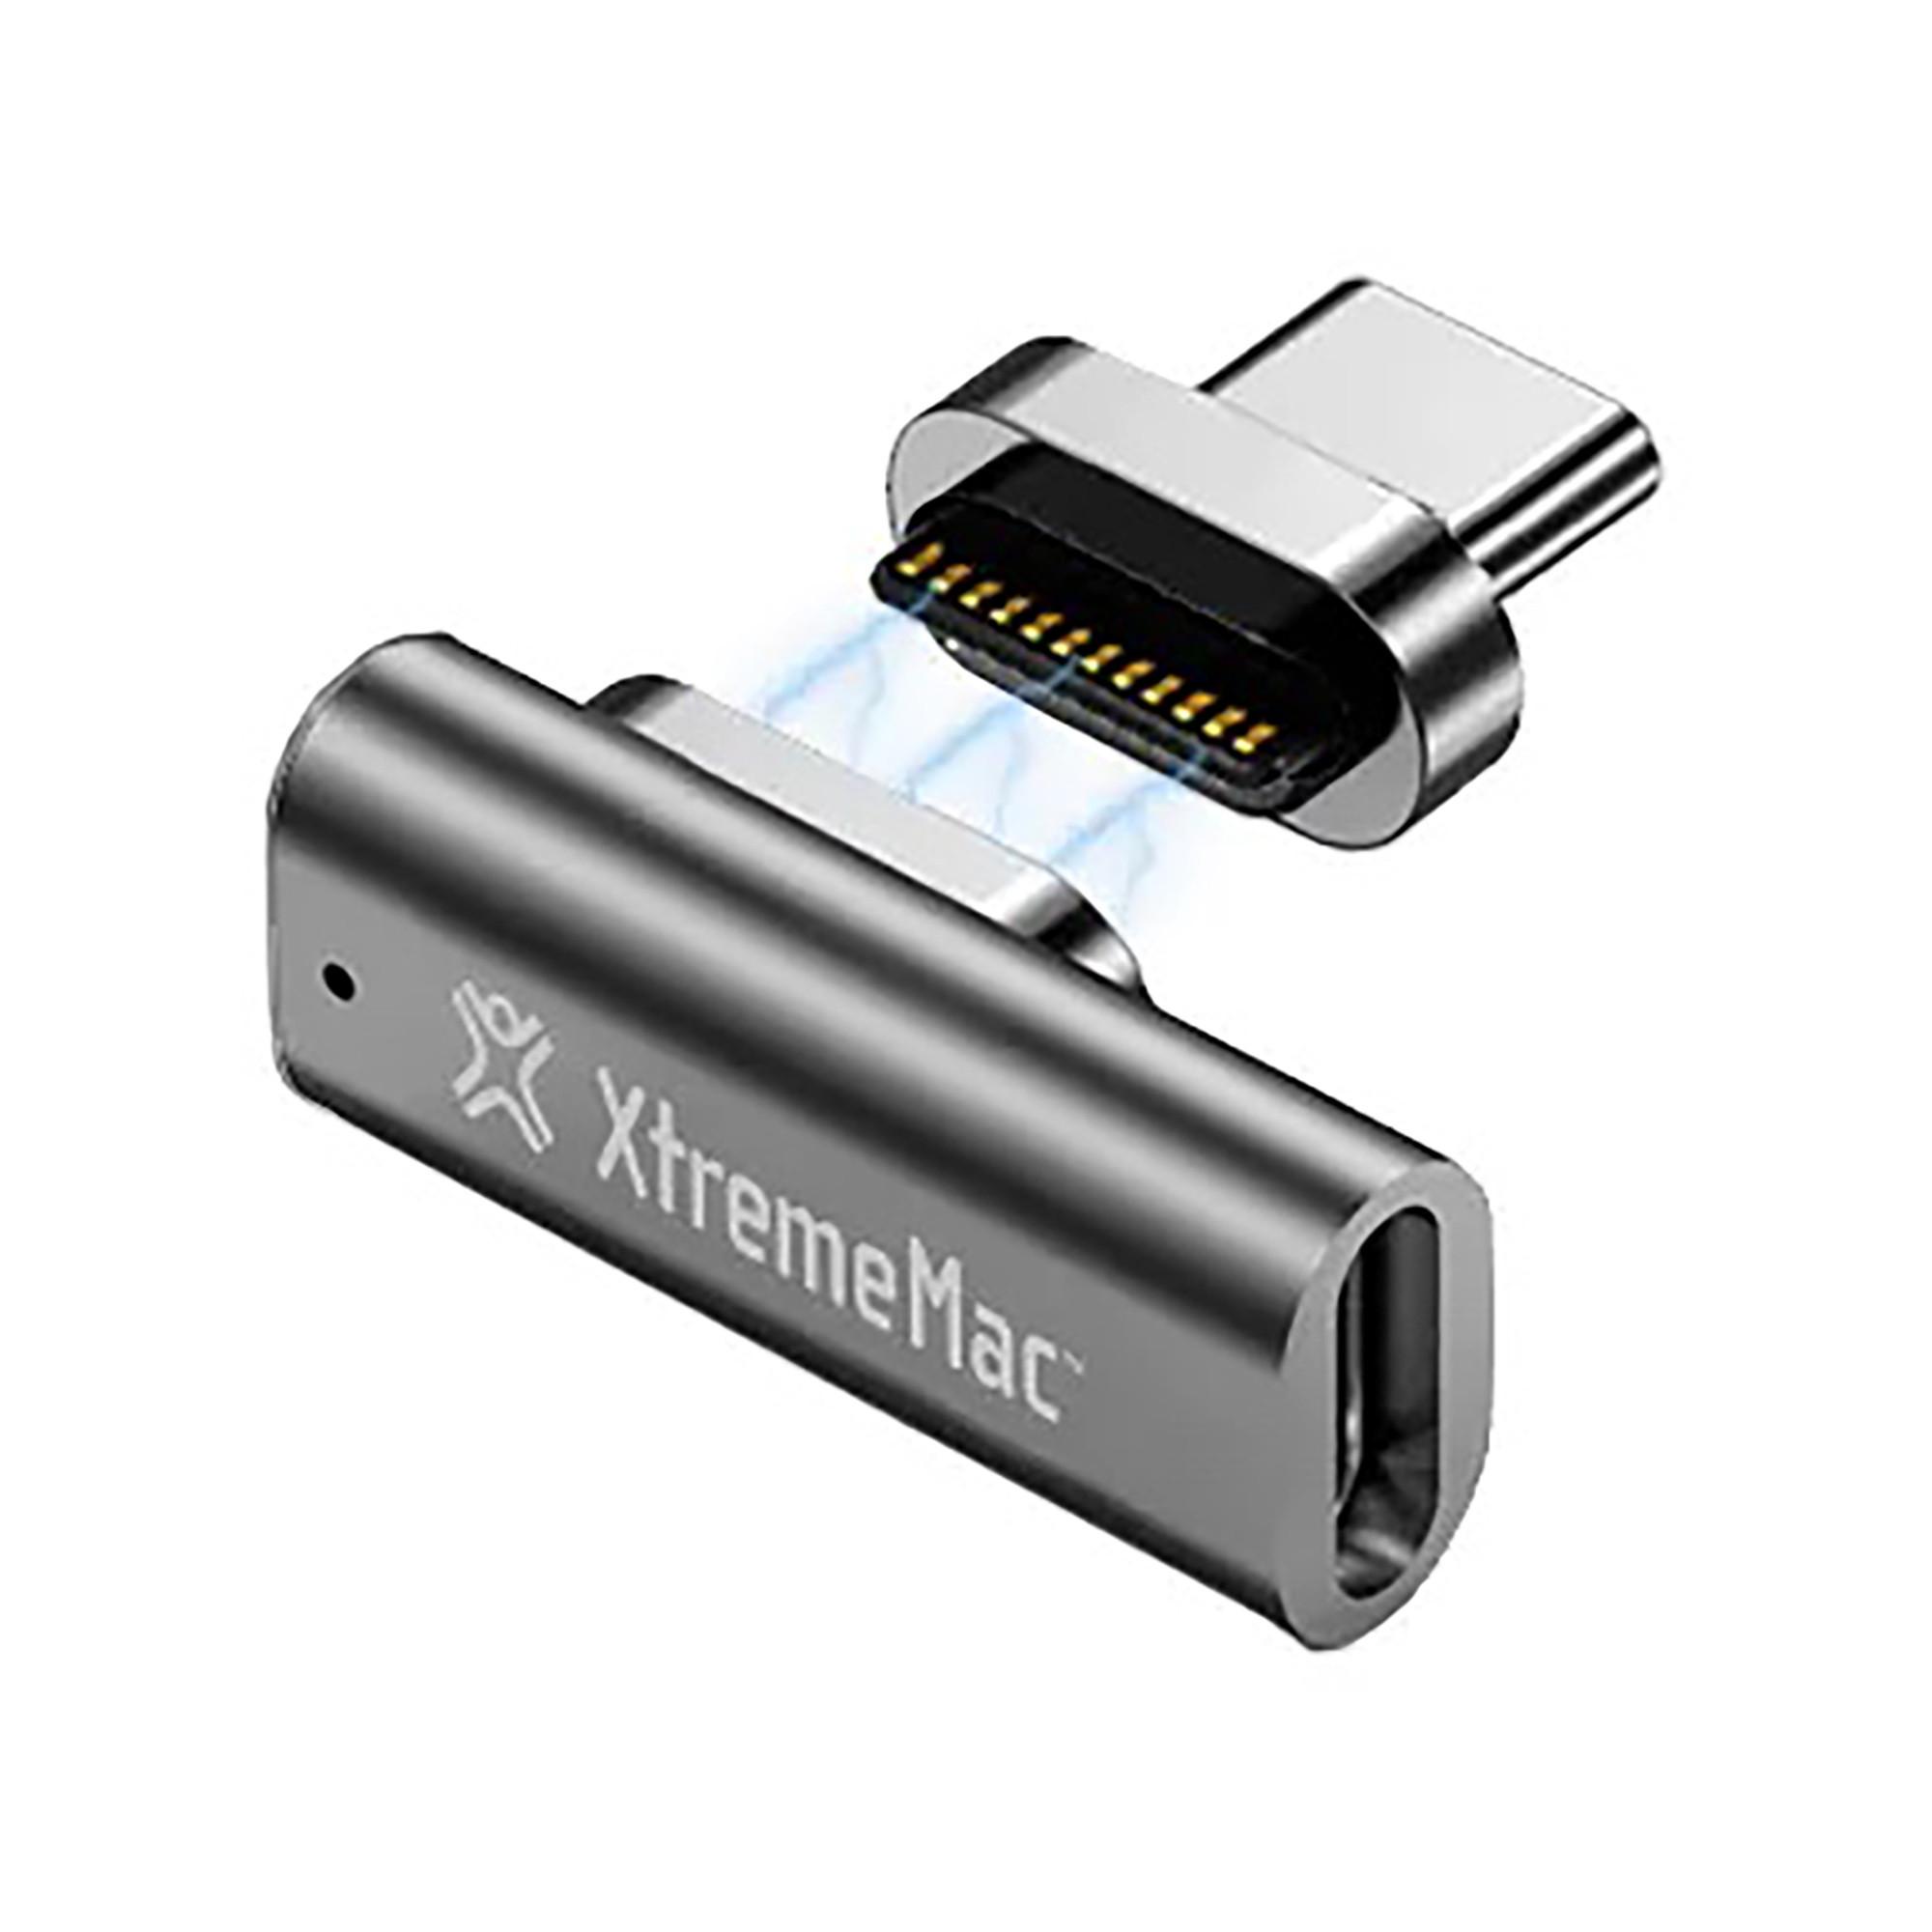 XtremeMac TYPE-C MAGNETIC ADAPTER - CHARGE & SYNC Adaptateur 